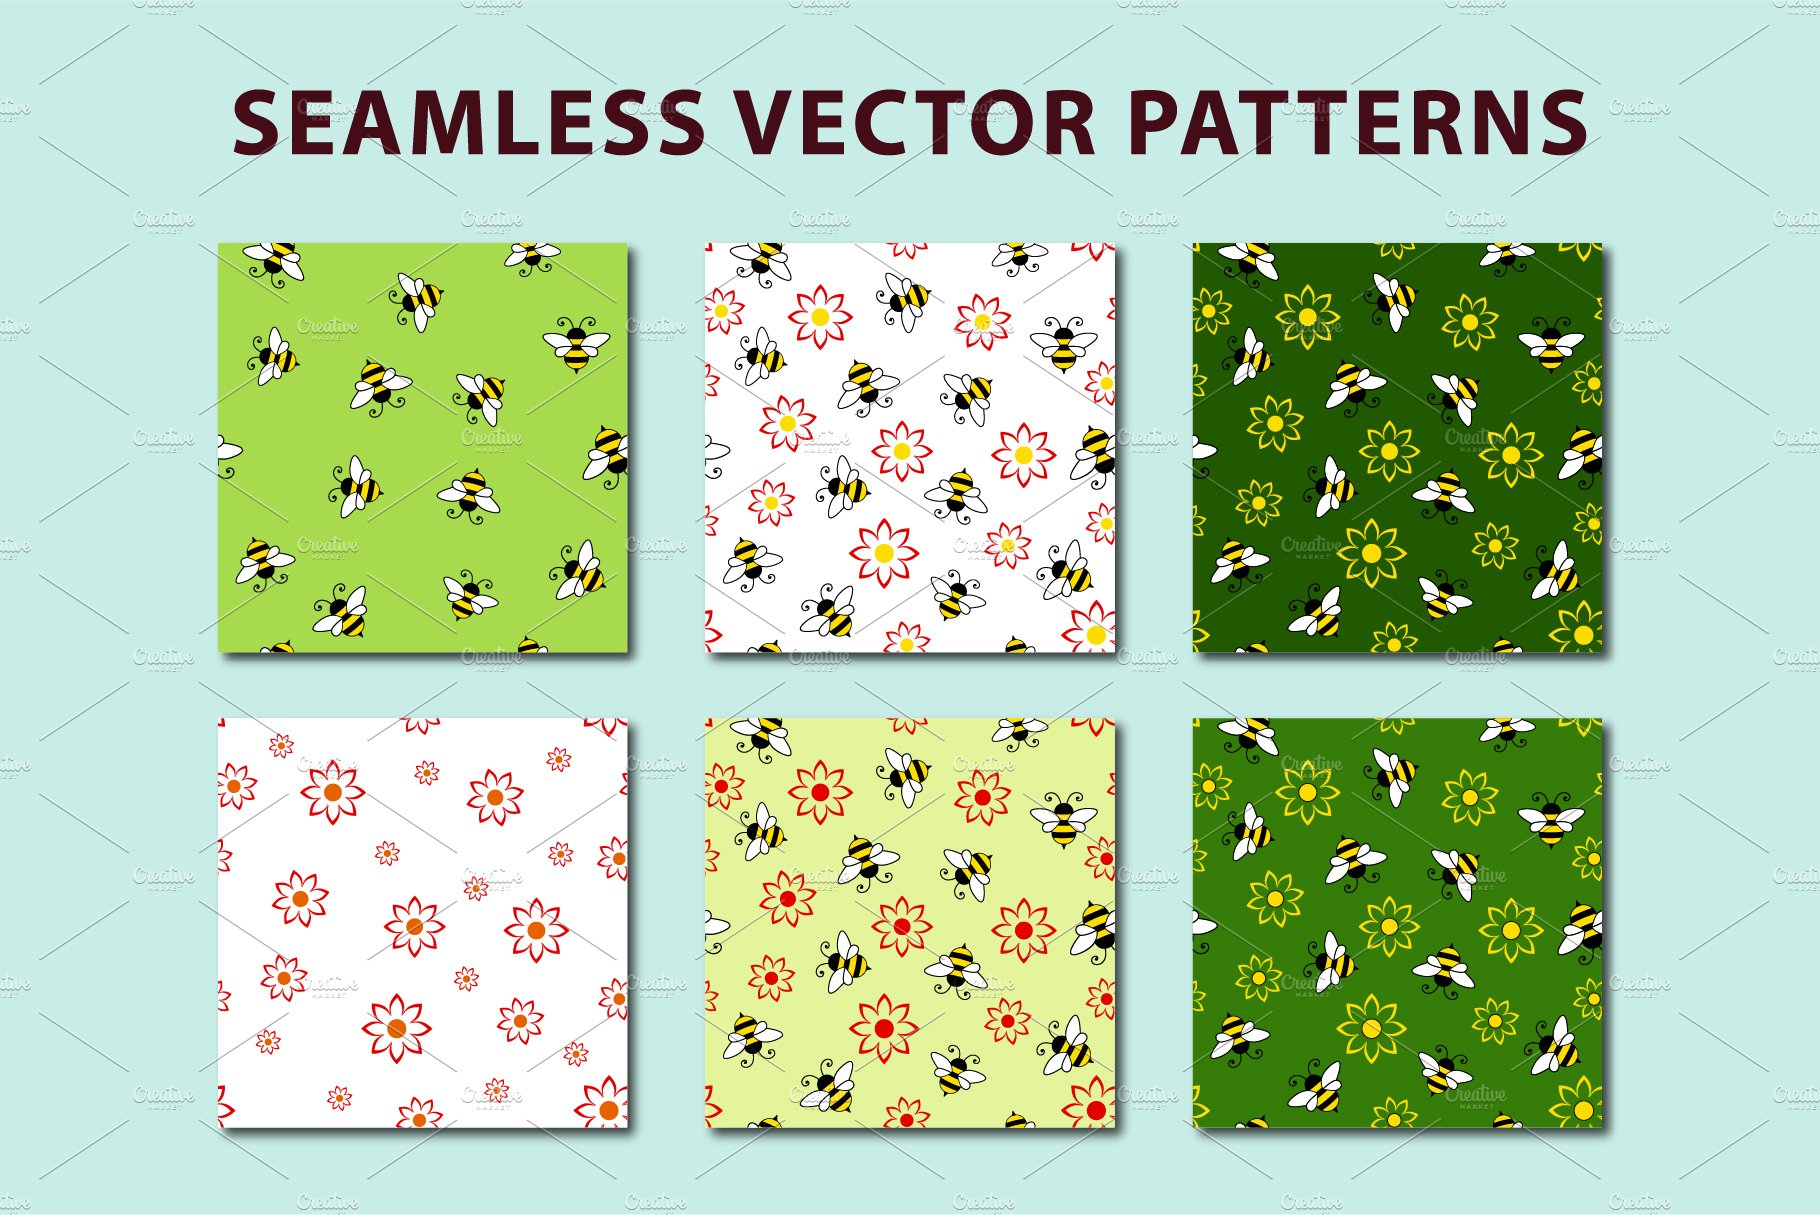 Bee seamless patterns cover image.